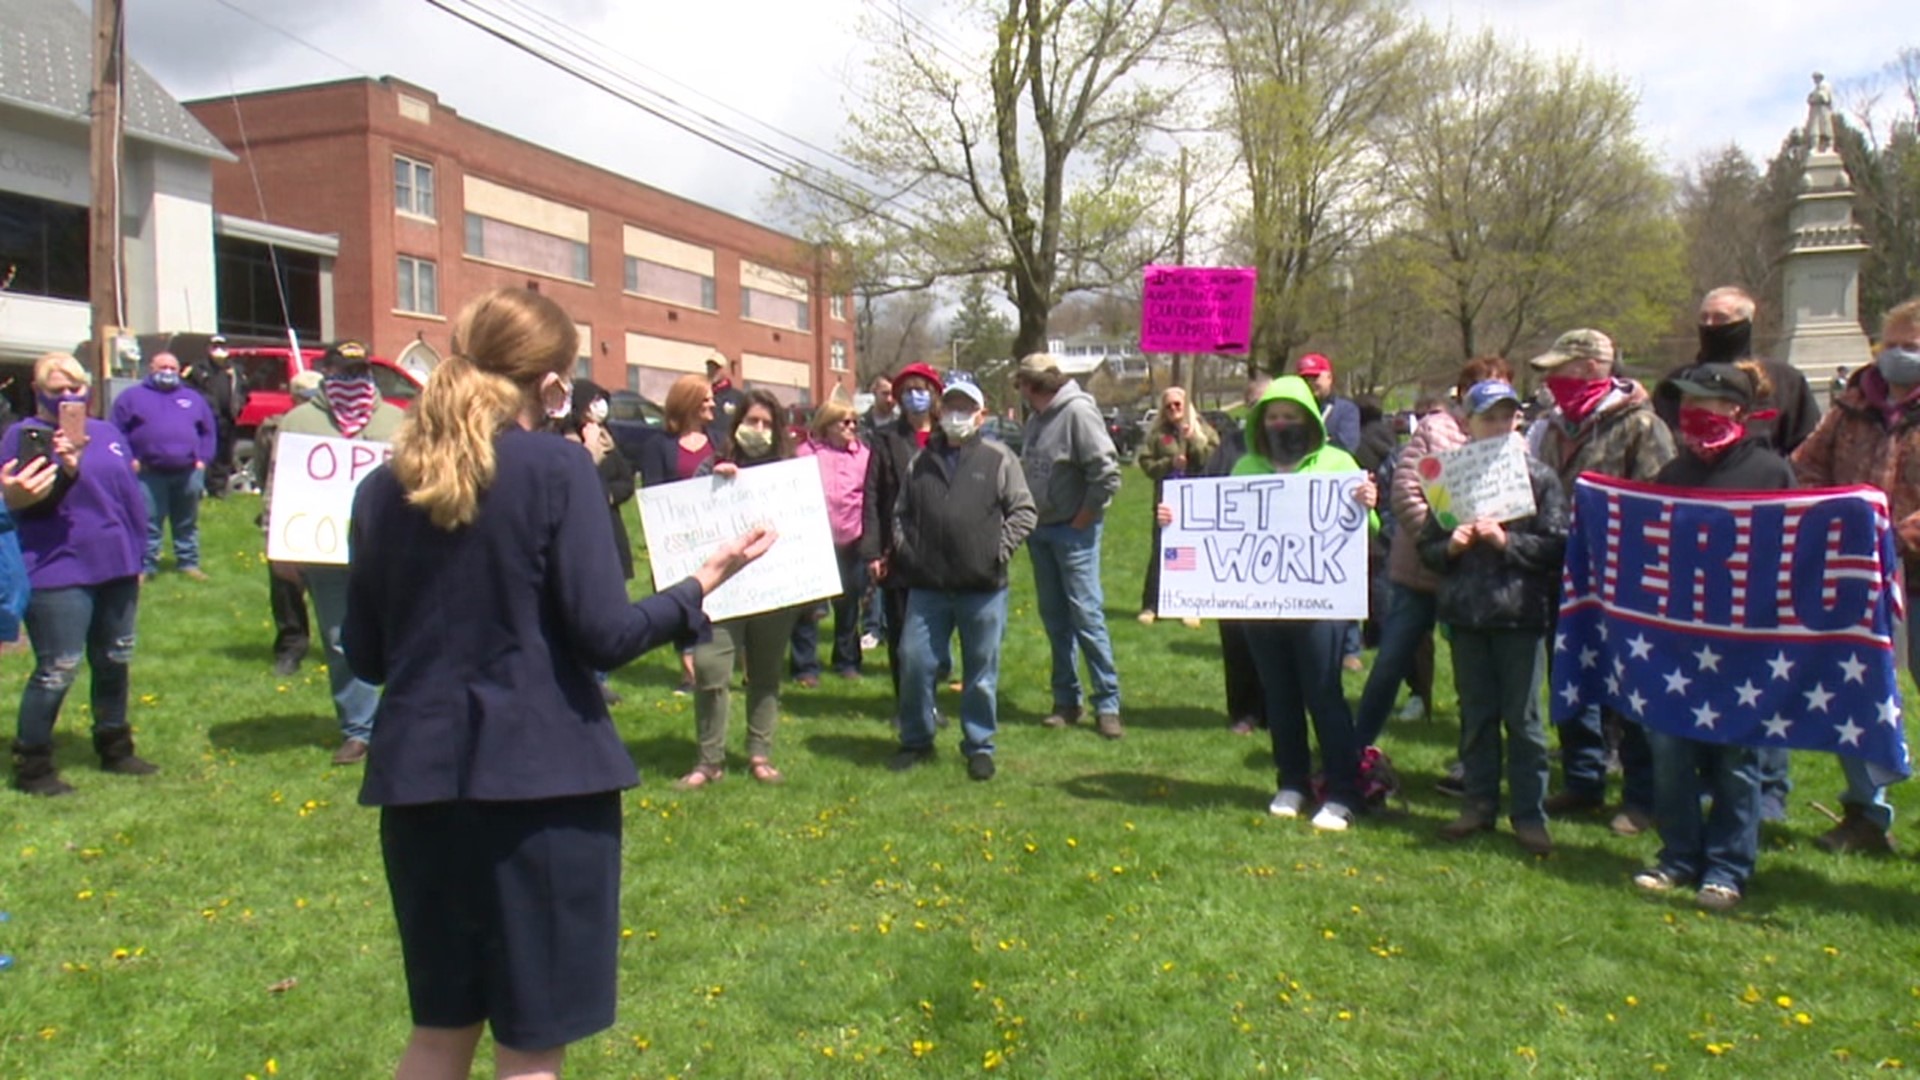 Tensions boiled over outside the Susquehanna County Courthouse in Montrose.